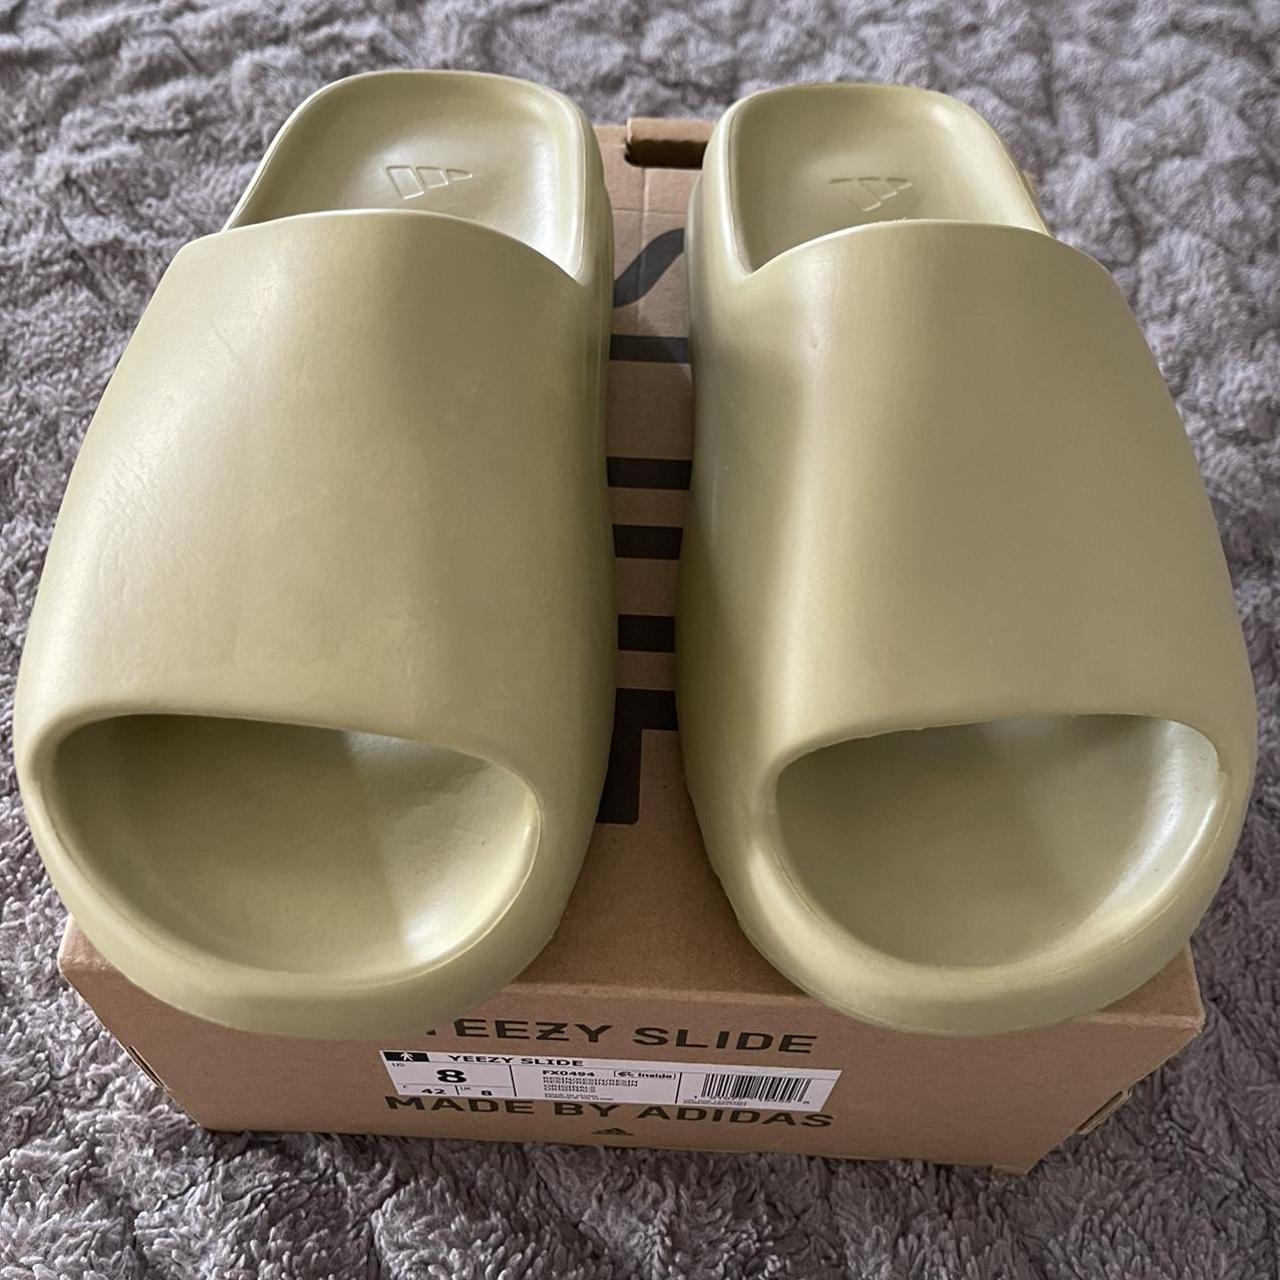 Authentic Yeezy Slides in color Resin. Size 8 in... - Depop